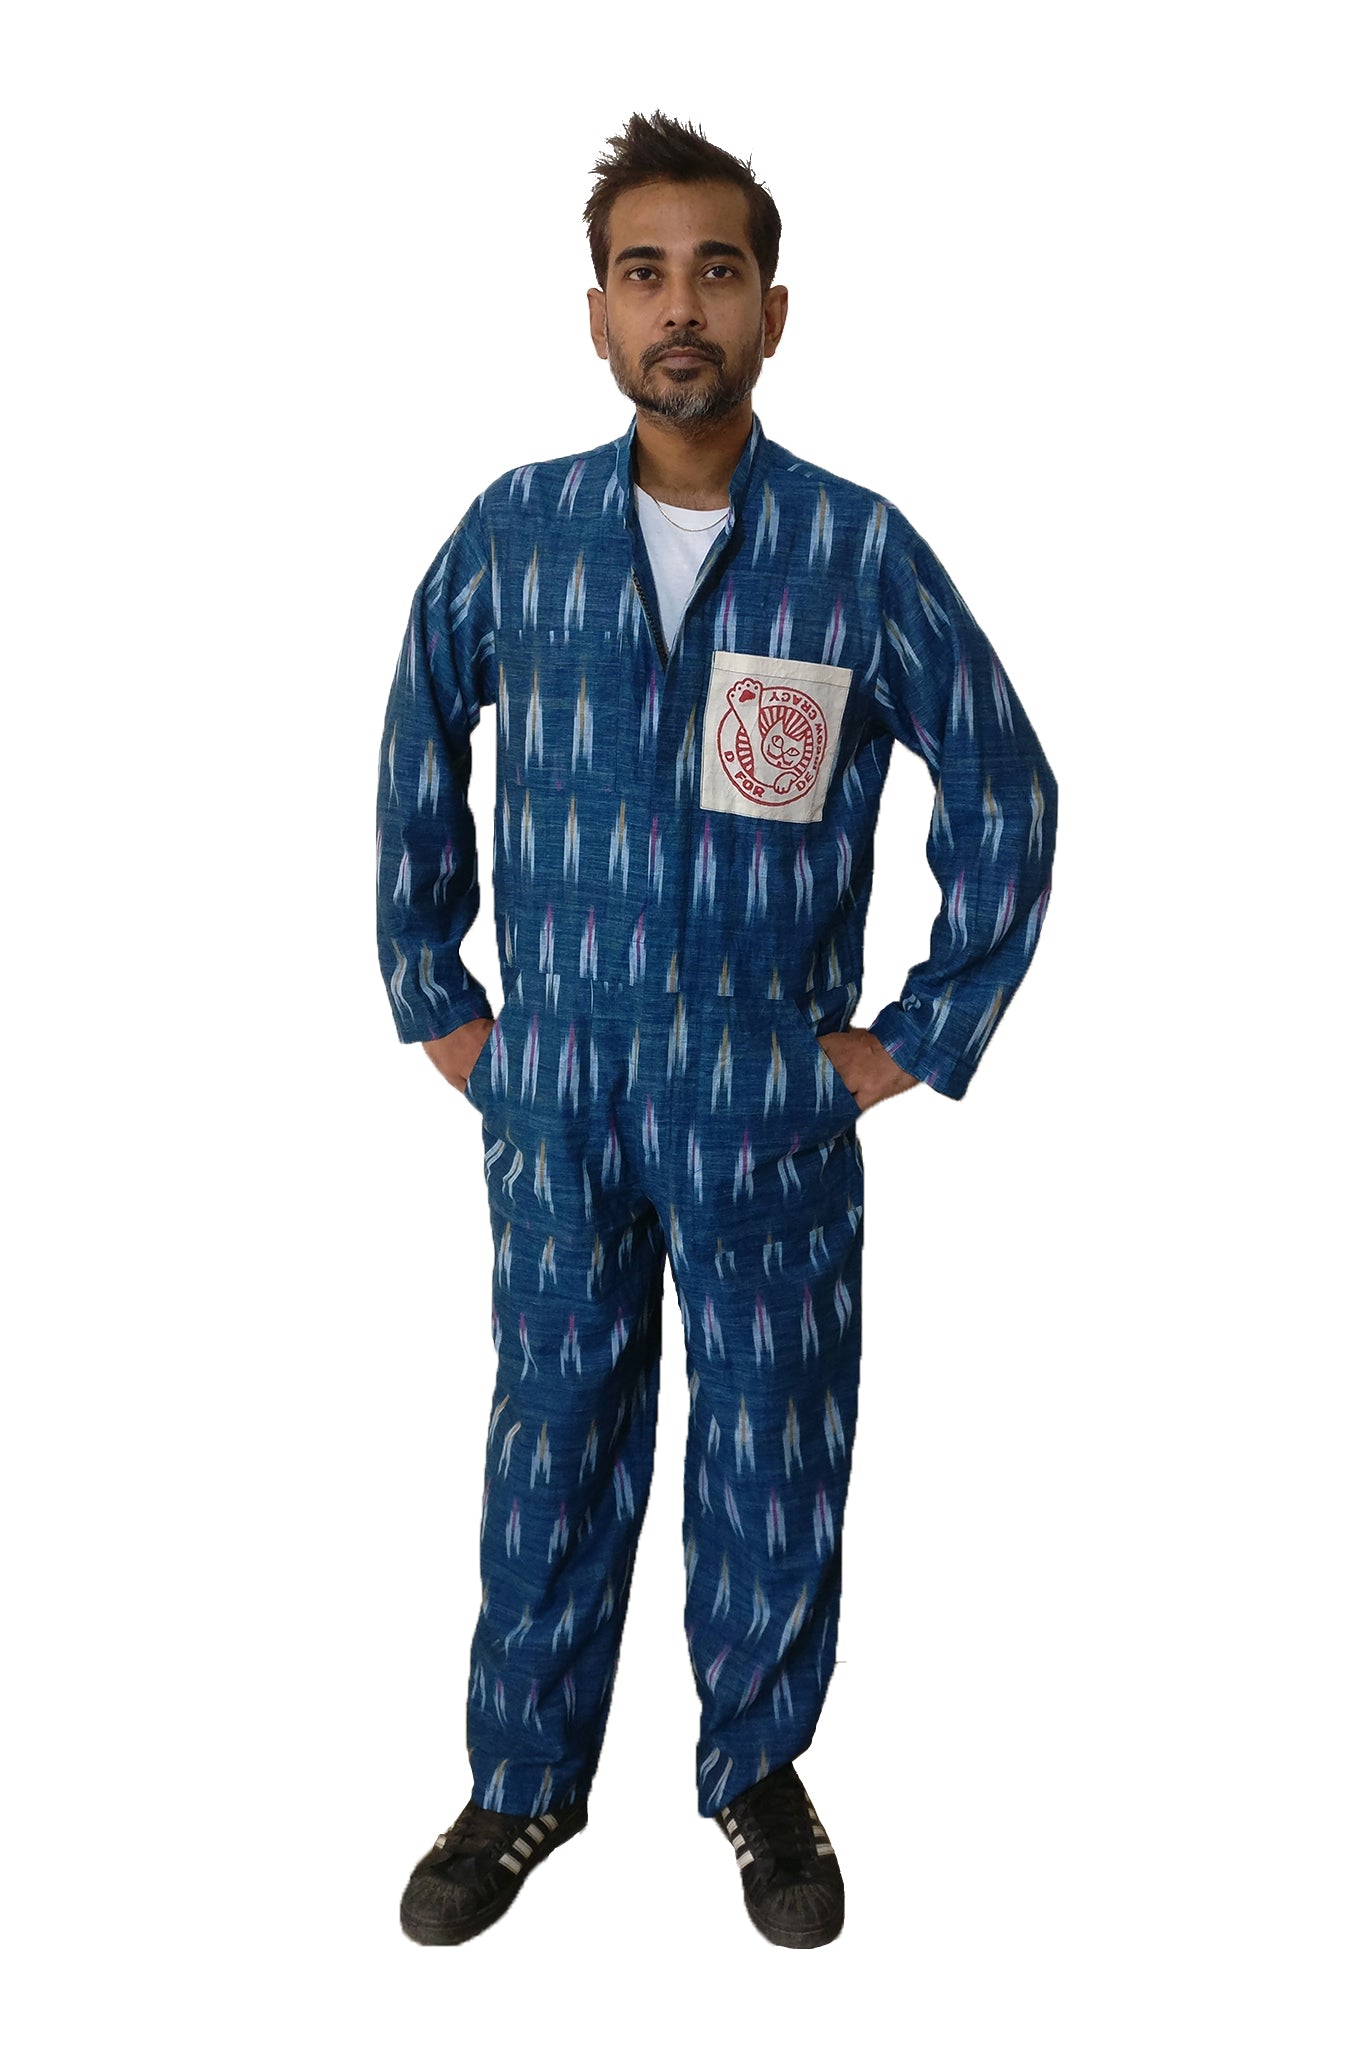 Classic boiler suit (coverall) for daily wear with an Indian traditional fabric, blue handloom cotton Ikat, for all the bodies (unisex) and body types! The oversized silhouette gives cool vibes. If you love jumpsuits, definitely try this! Shop online. - Man model